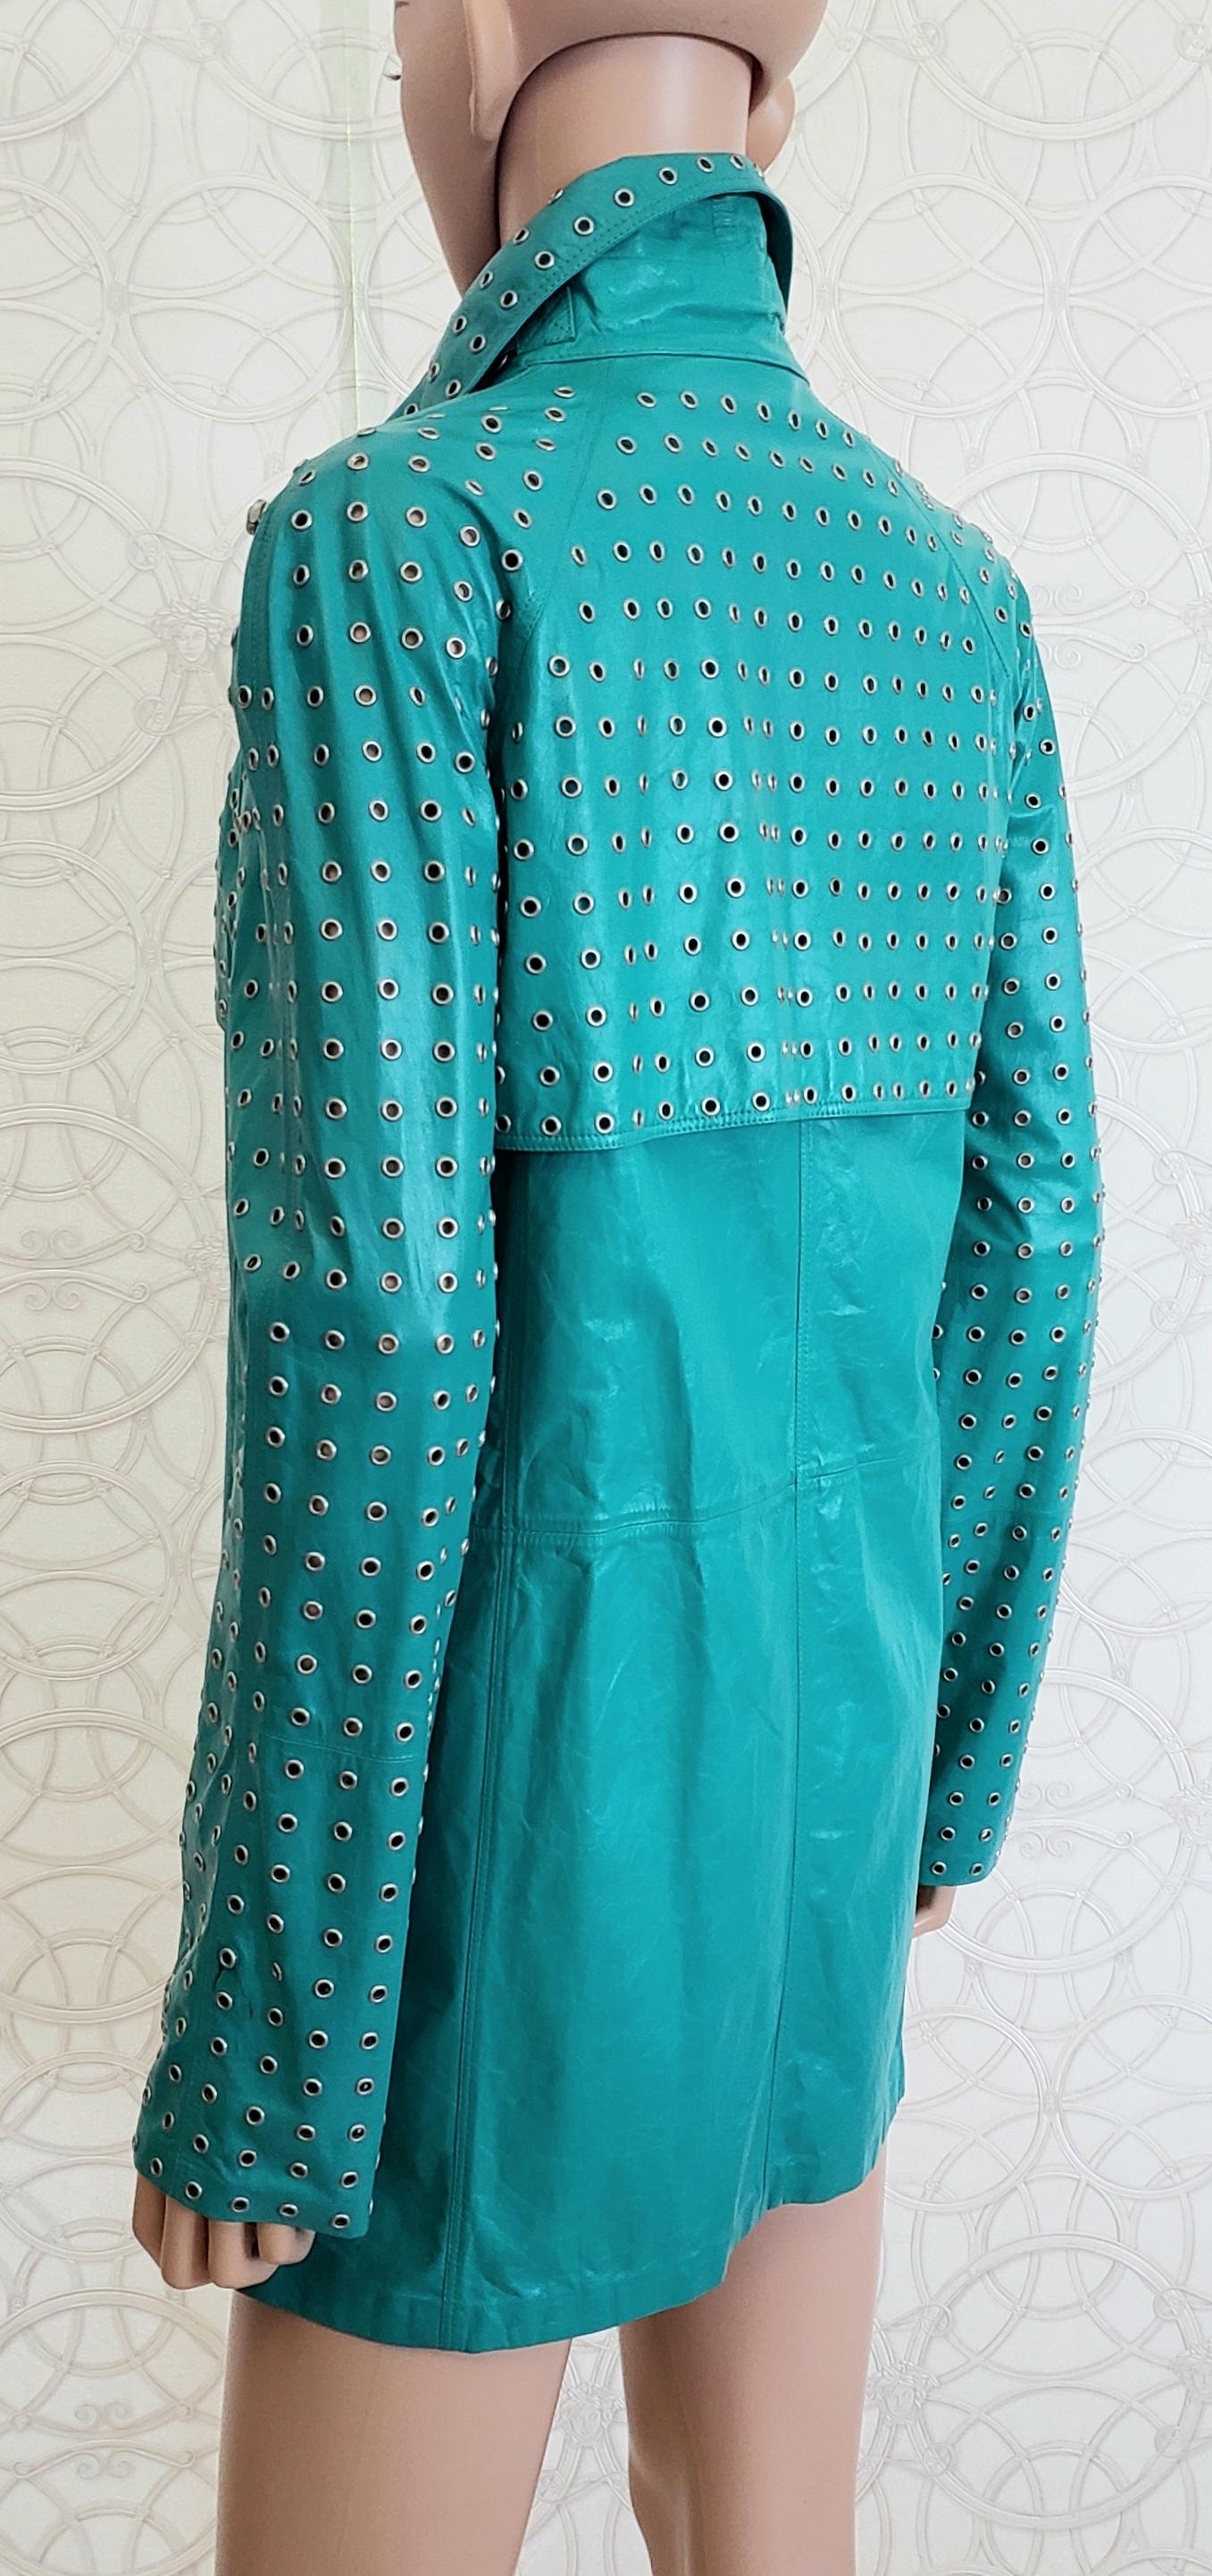 NEW GIANNI VERSACE EMERALD GREEN LEATHER JACKET with RIVETS Sz IT 40 - US 4/6 For Sale 1